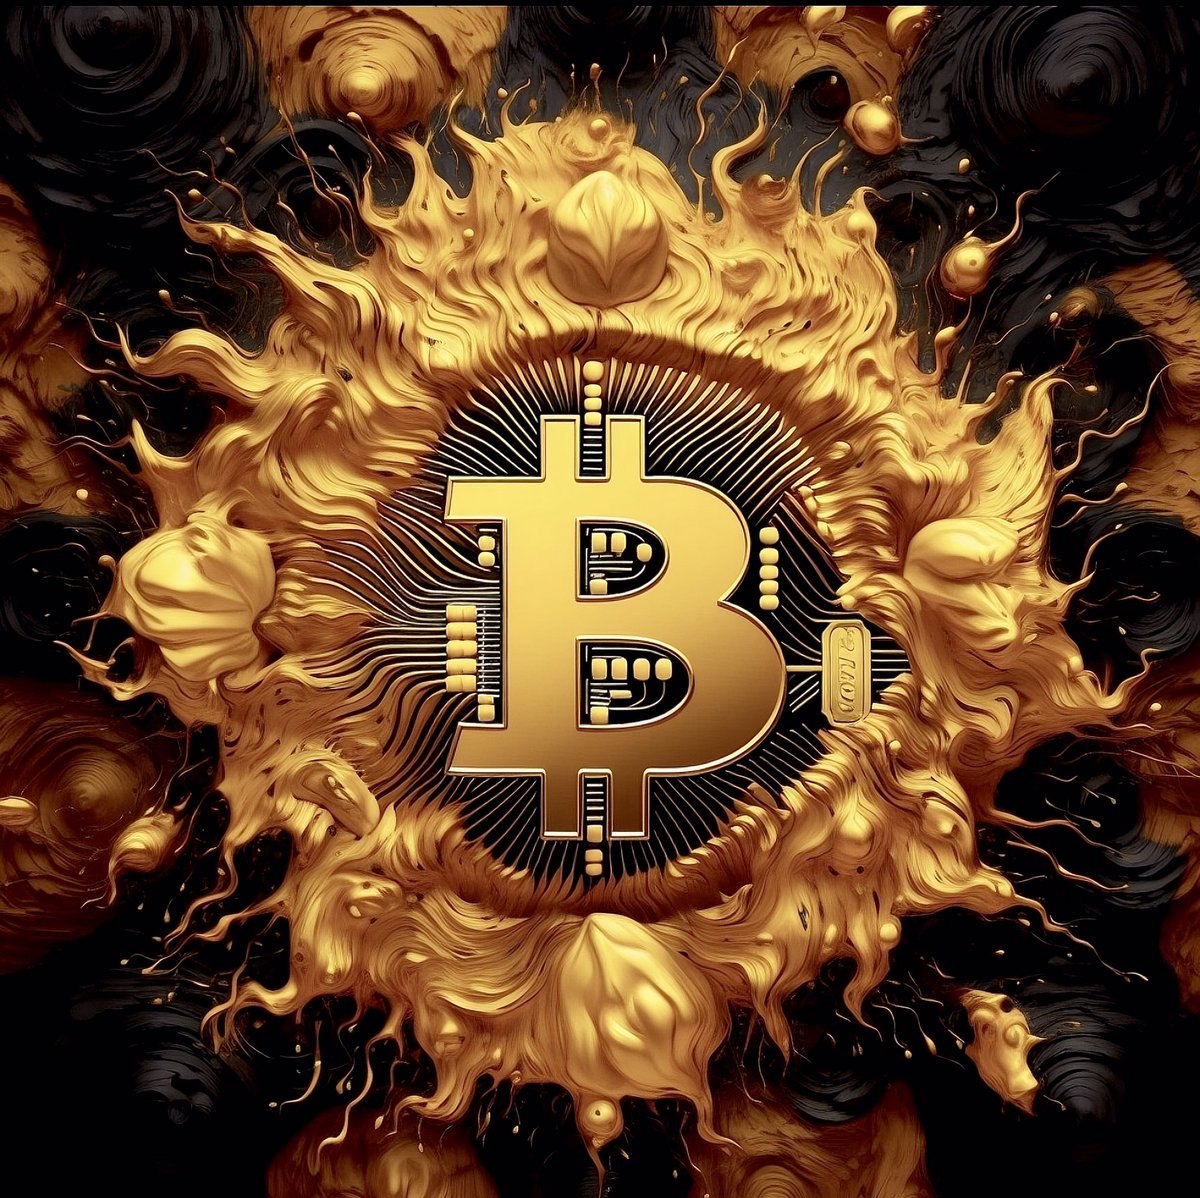 “We’re witnessing a powerful surge in #Bitcoin Maximalism. The flame of #Bitcoin burns brighter than ever before.” -@thomas_fahrer